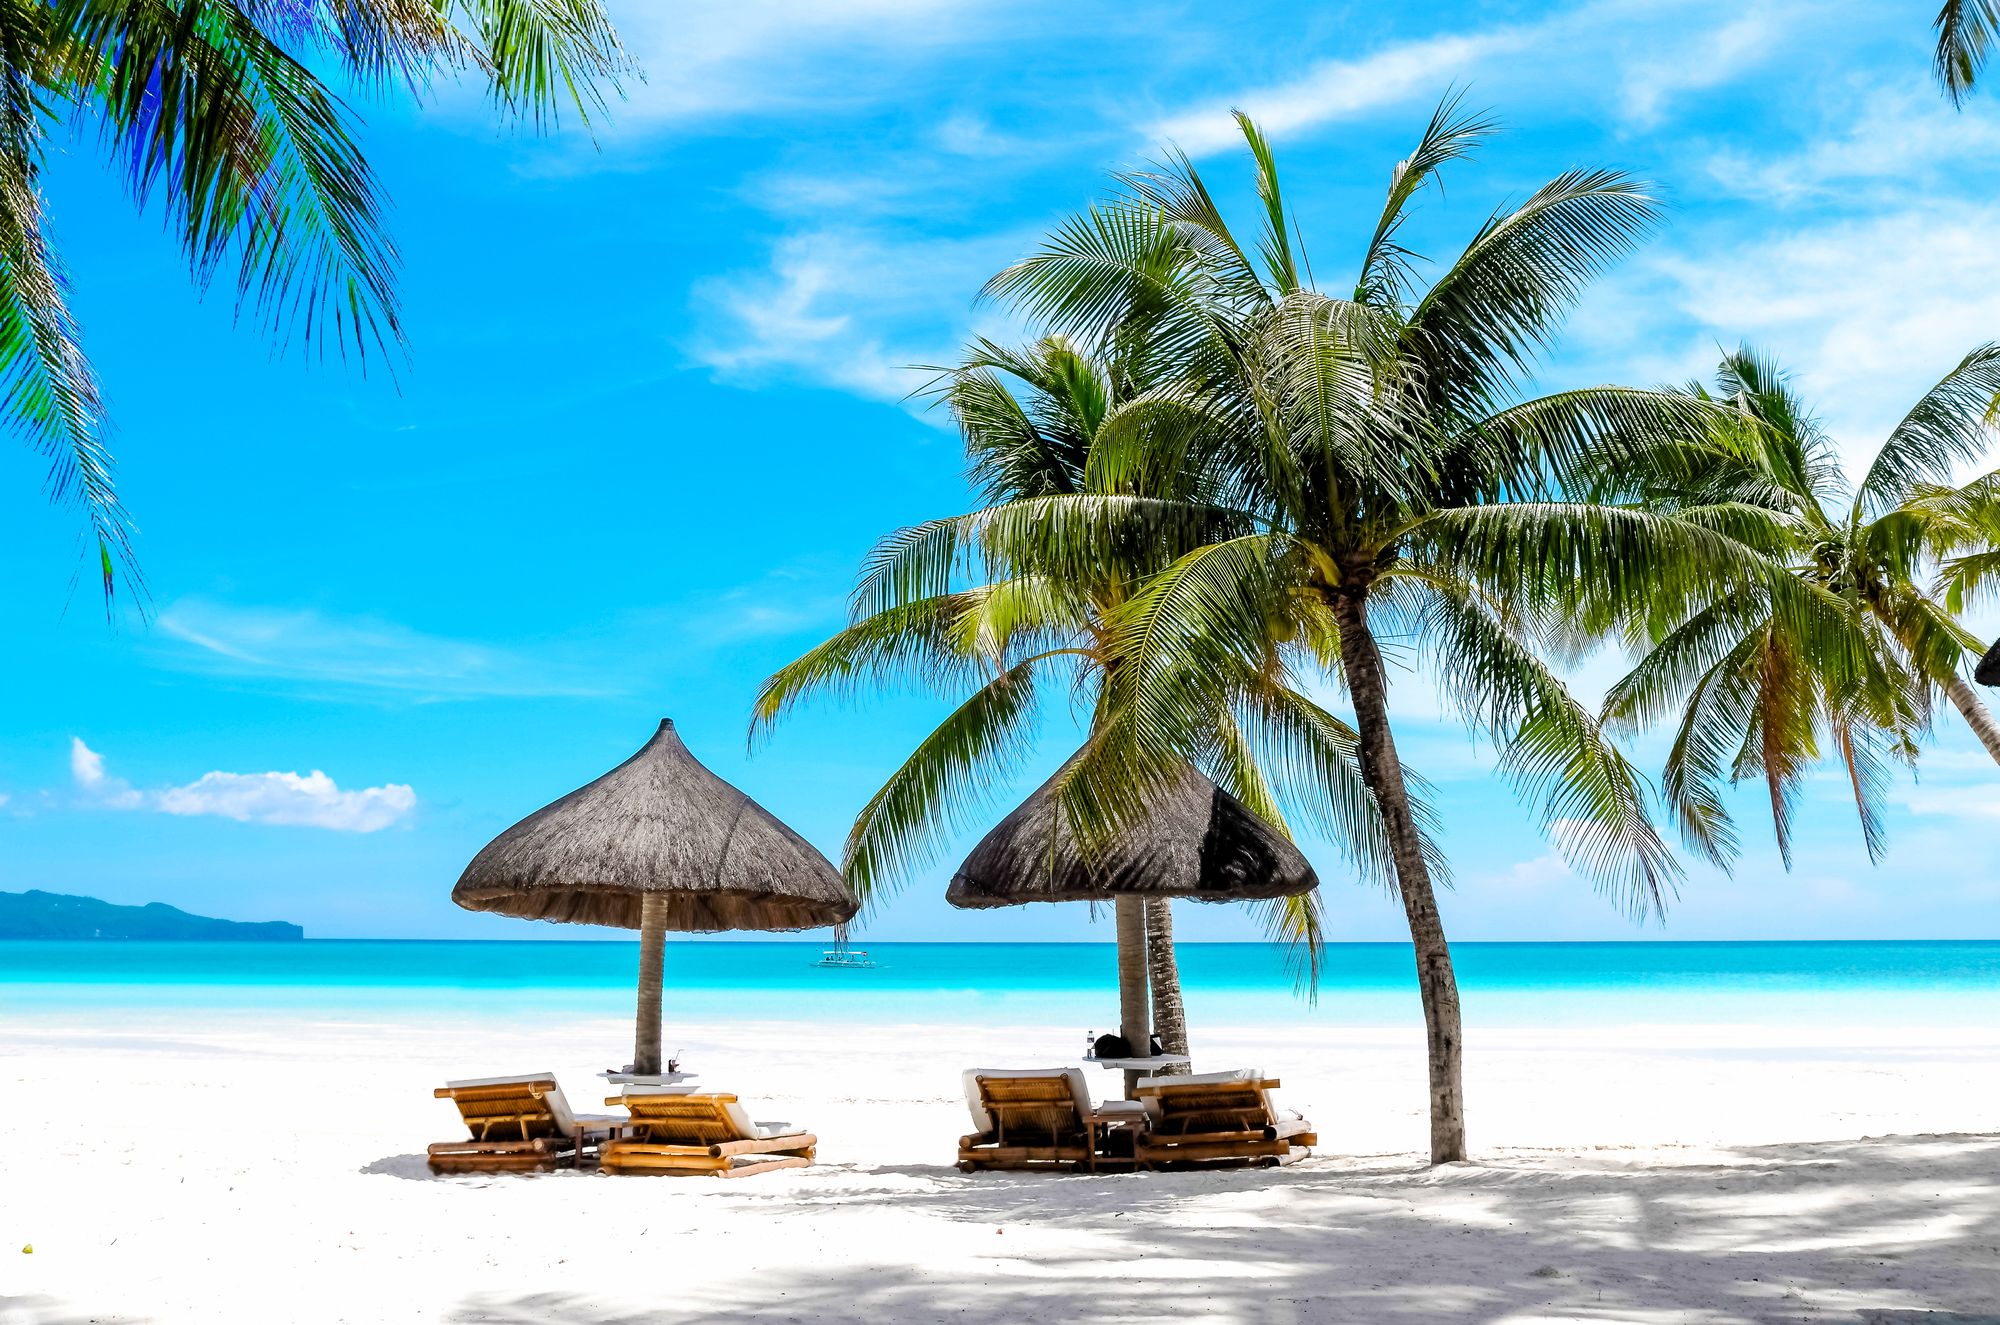 WEBINAR SUMMARY: GUIDE TO VISITING BORACAY IN THE NEW NORMAL